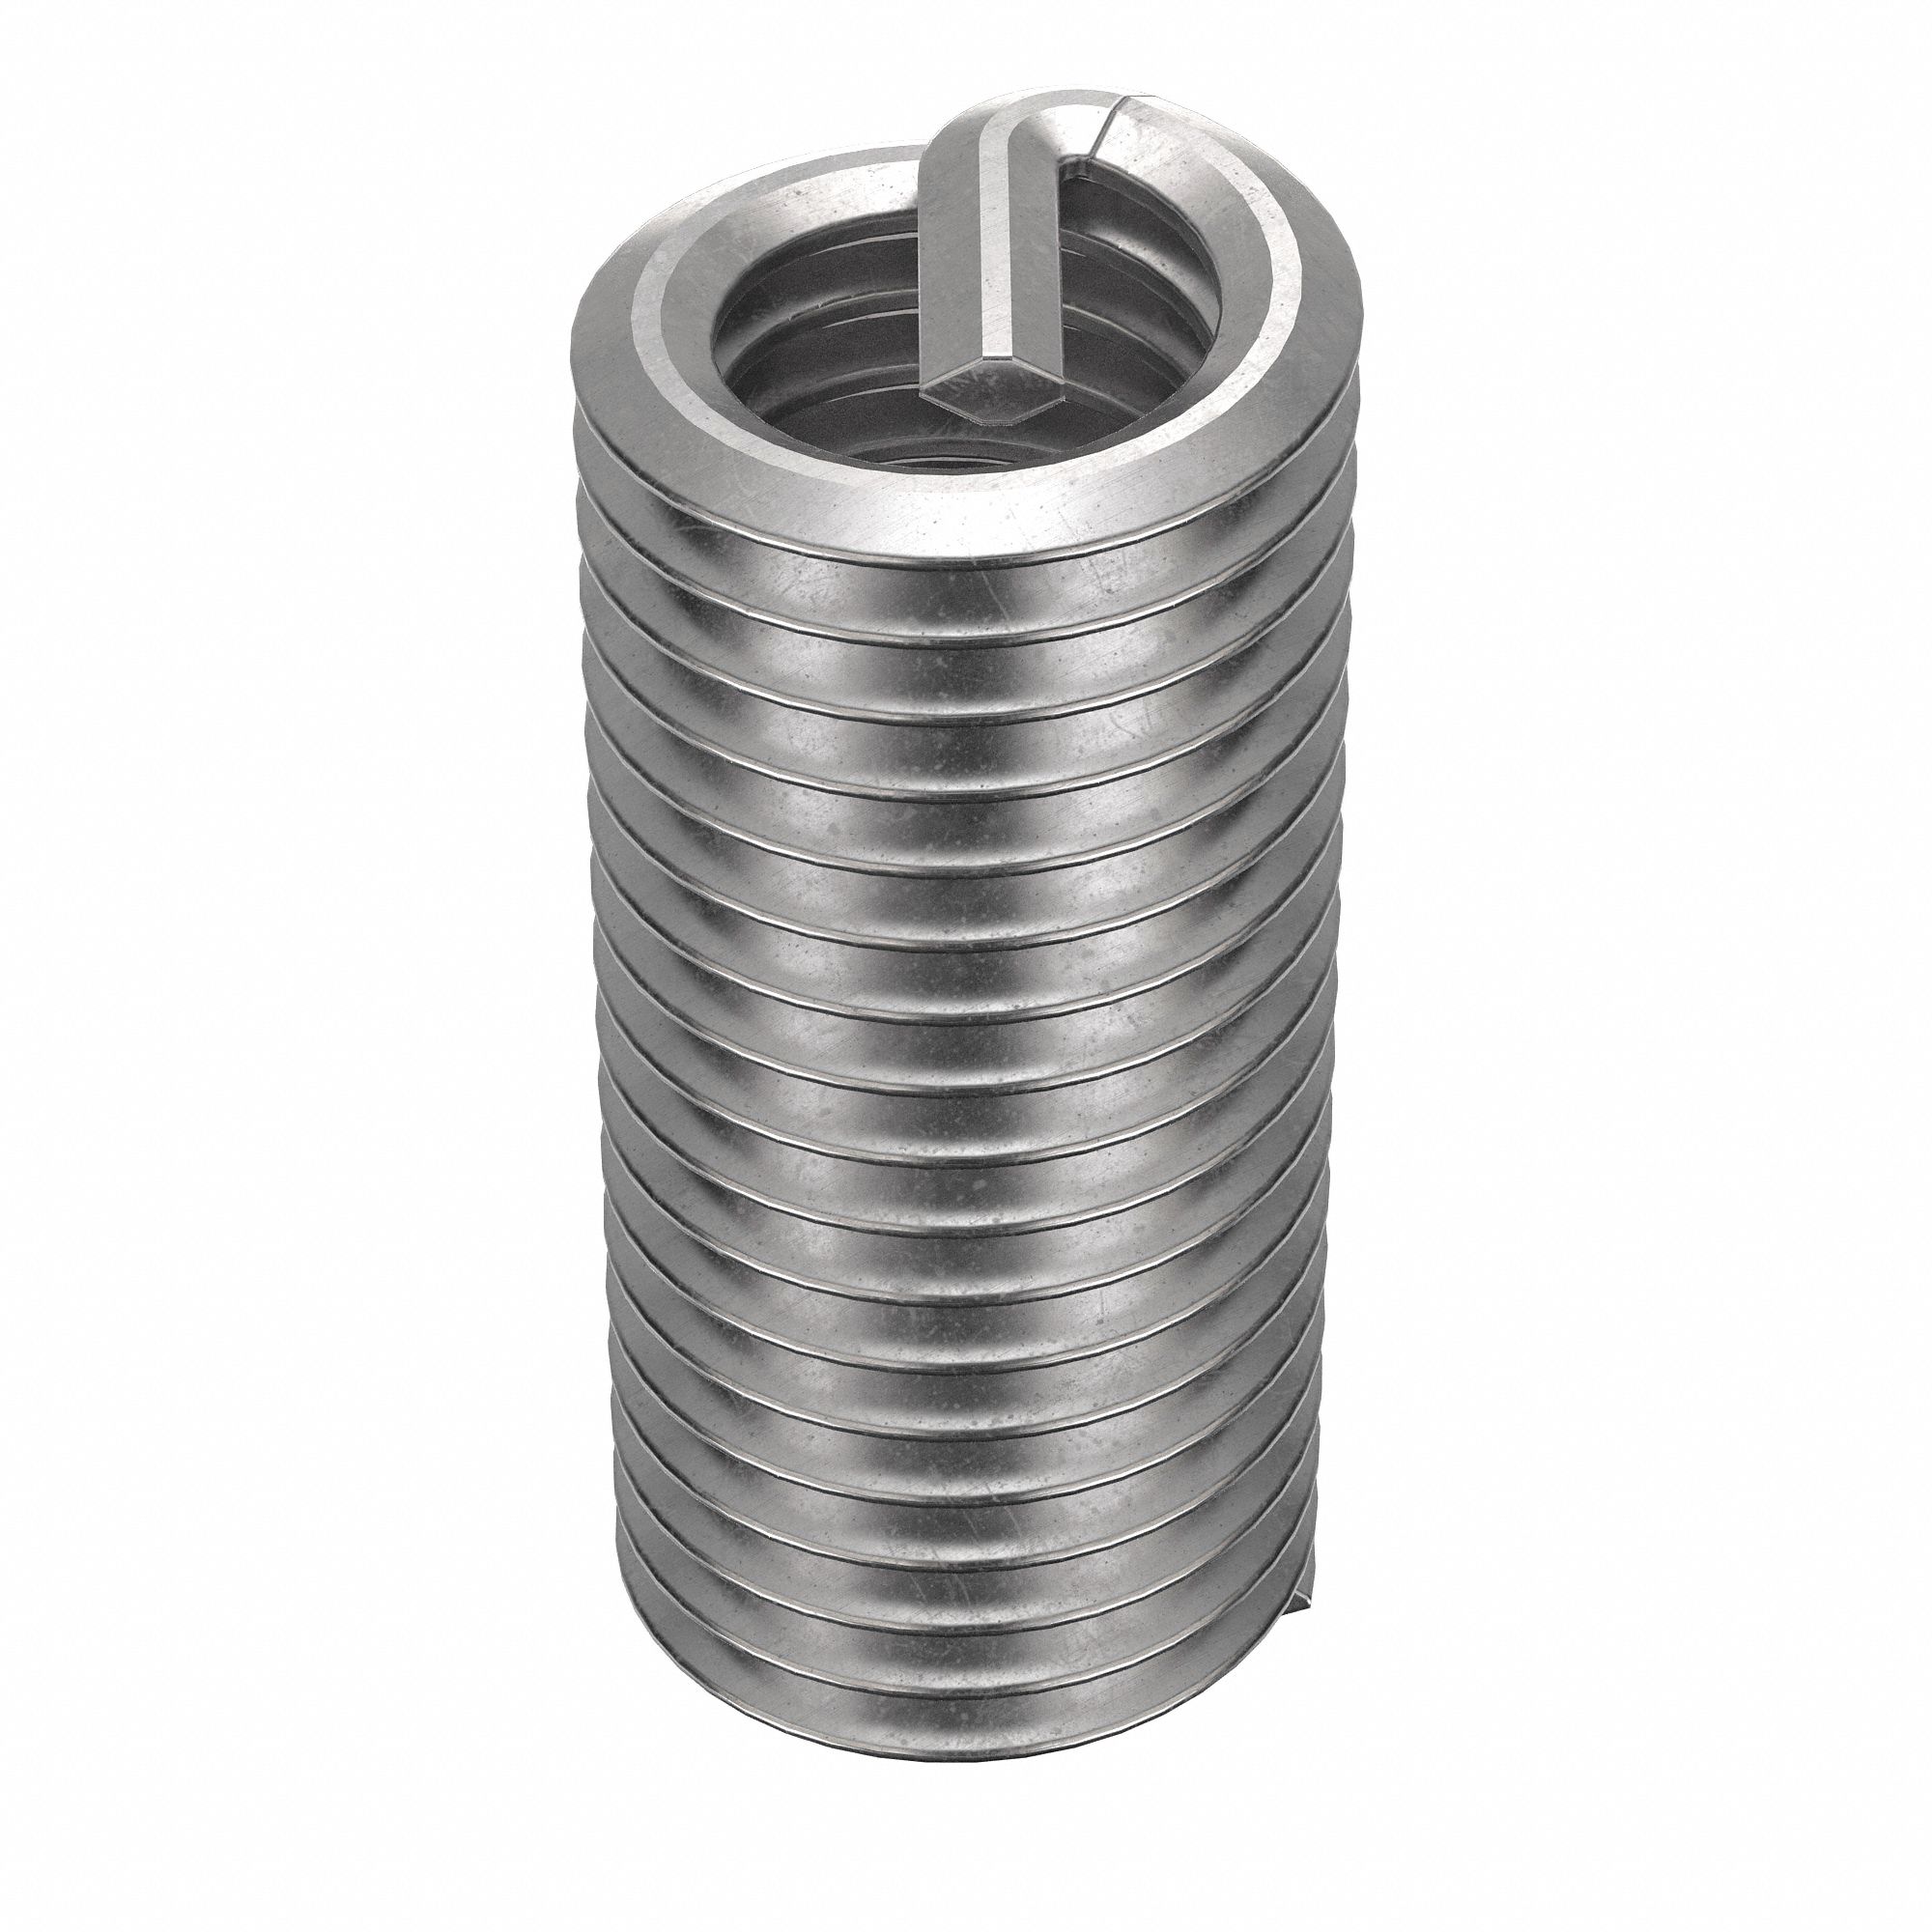 HELI-COIL Helical Insert: Tanged Tang Style, Free-Running, M8-1.25 Thread  Size, Plain, Plain, 100 PK